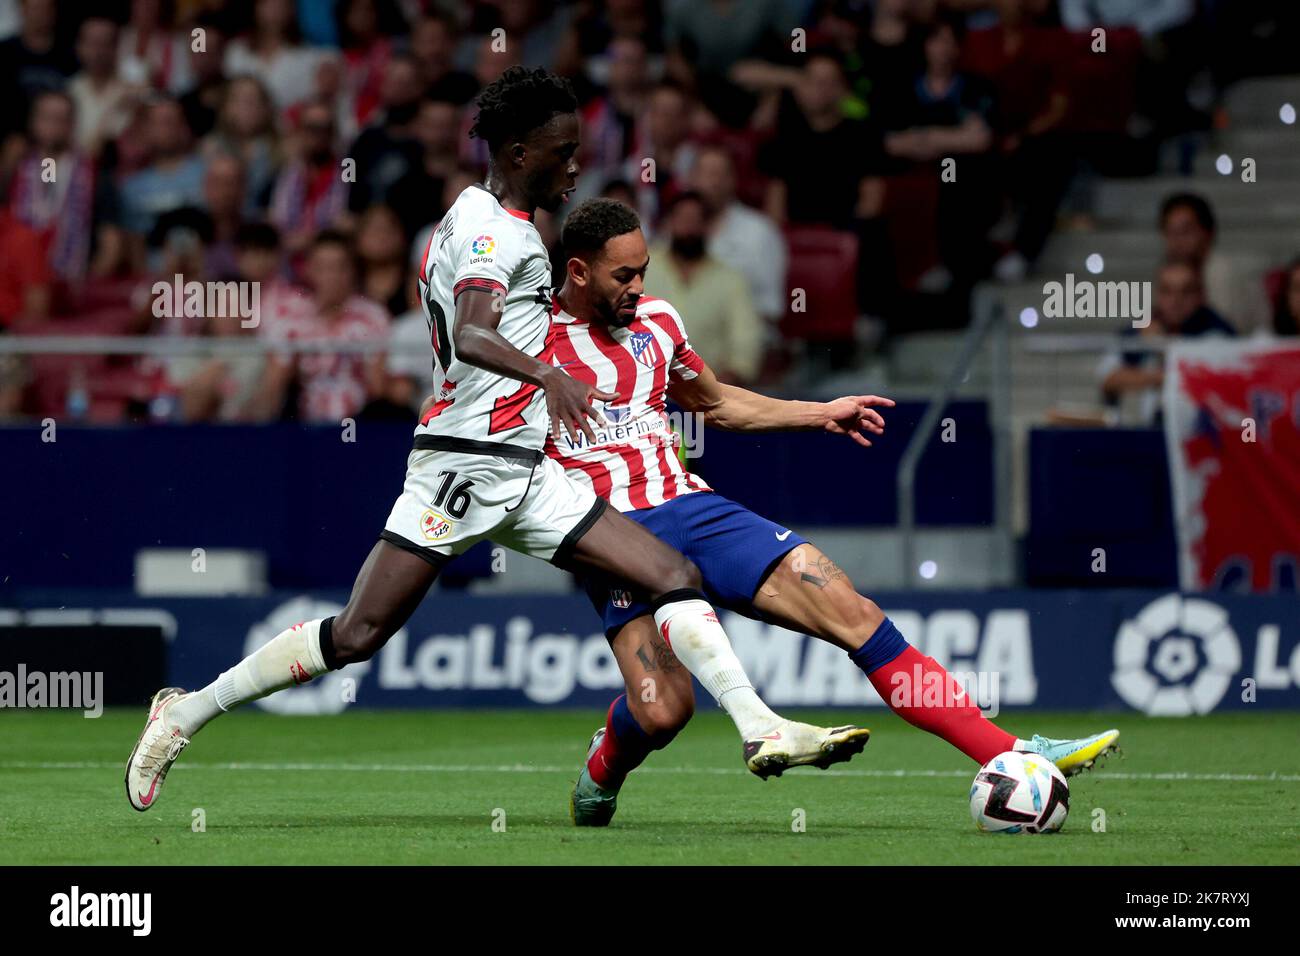 Madrid, Spanien. 18th Oct, 2022. Madrid Spain; 18.10.2022.- Atletico de Madrid Matheus Cunha (R) and Rayo Vallecano player Mumin (L). Atlético de Madrid vs Rayo Vallecano Football match between Madrid teams from the Spanish League on matchday 10 held at Civitas Metropolitano Stadium to capital of the Kingdom of Spain and ended in a tie at 1. Atletico Madrid goal by Morata 20  Rayo Vallecano goal by Radamel Falcao 90 2' penalty Credit: Juan Carlos Rojas/dpa/Alamy Live News Stock Photo